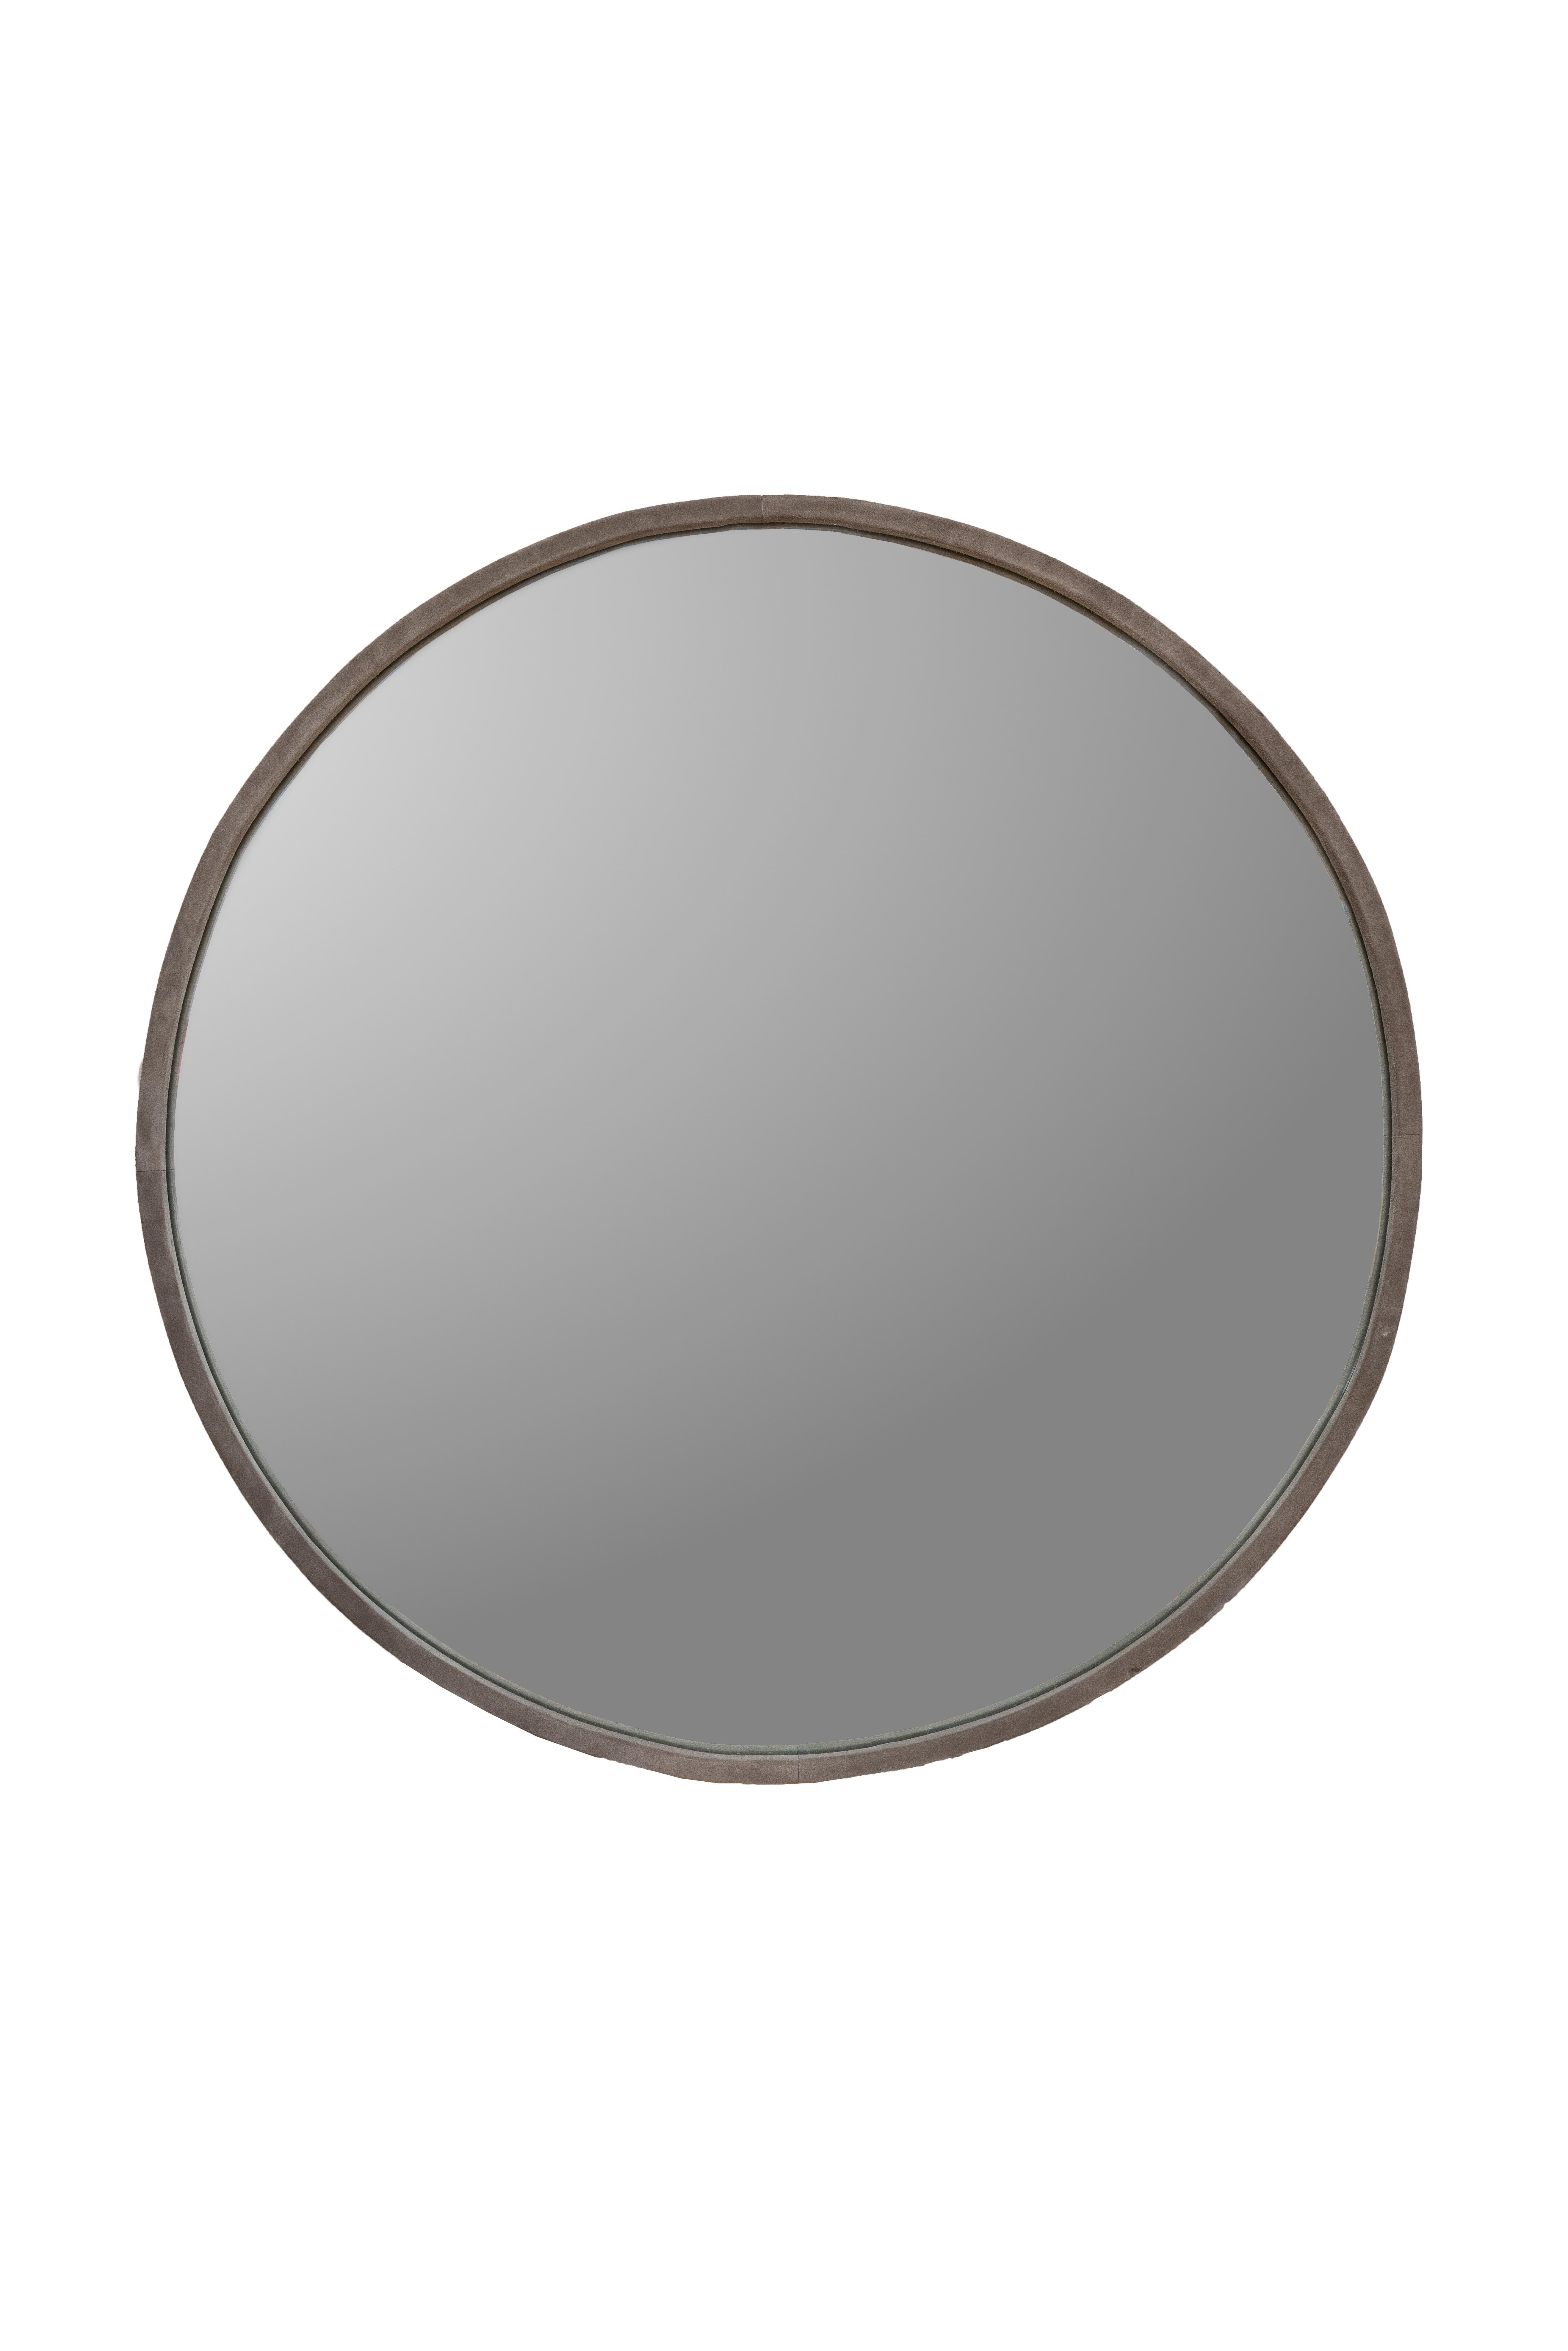 A Grey Suede mirror manufactured for The Line - a stunning piece that effortlessly combines sleek design with luxurious materials.